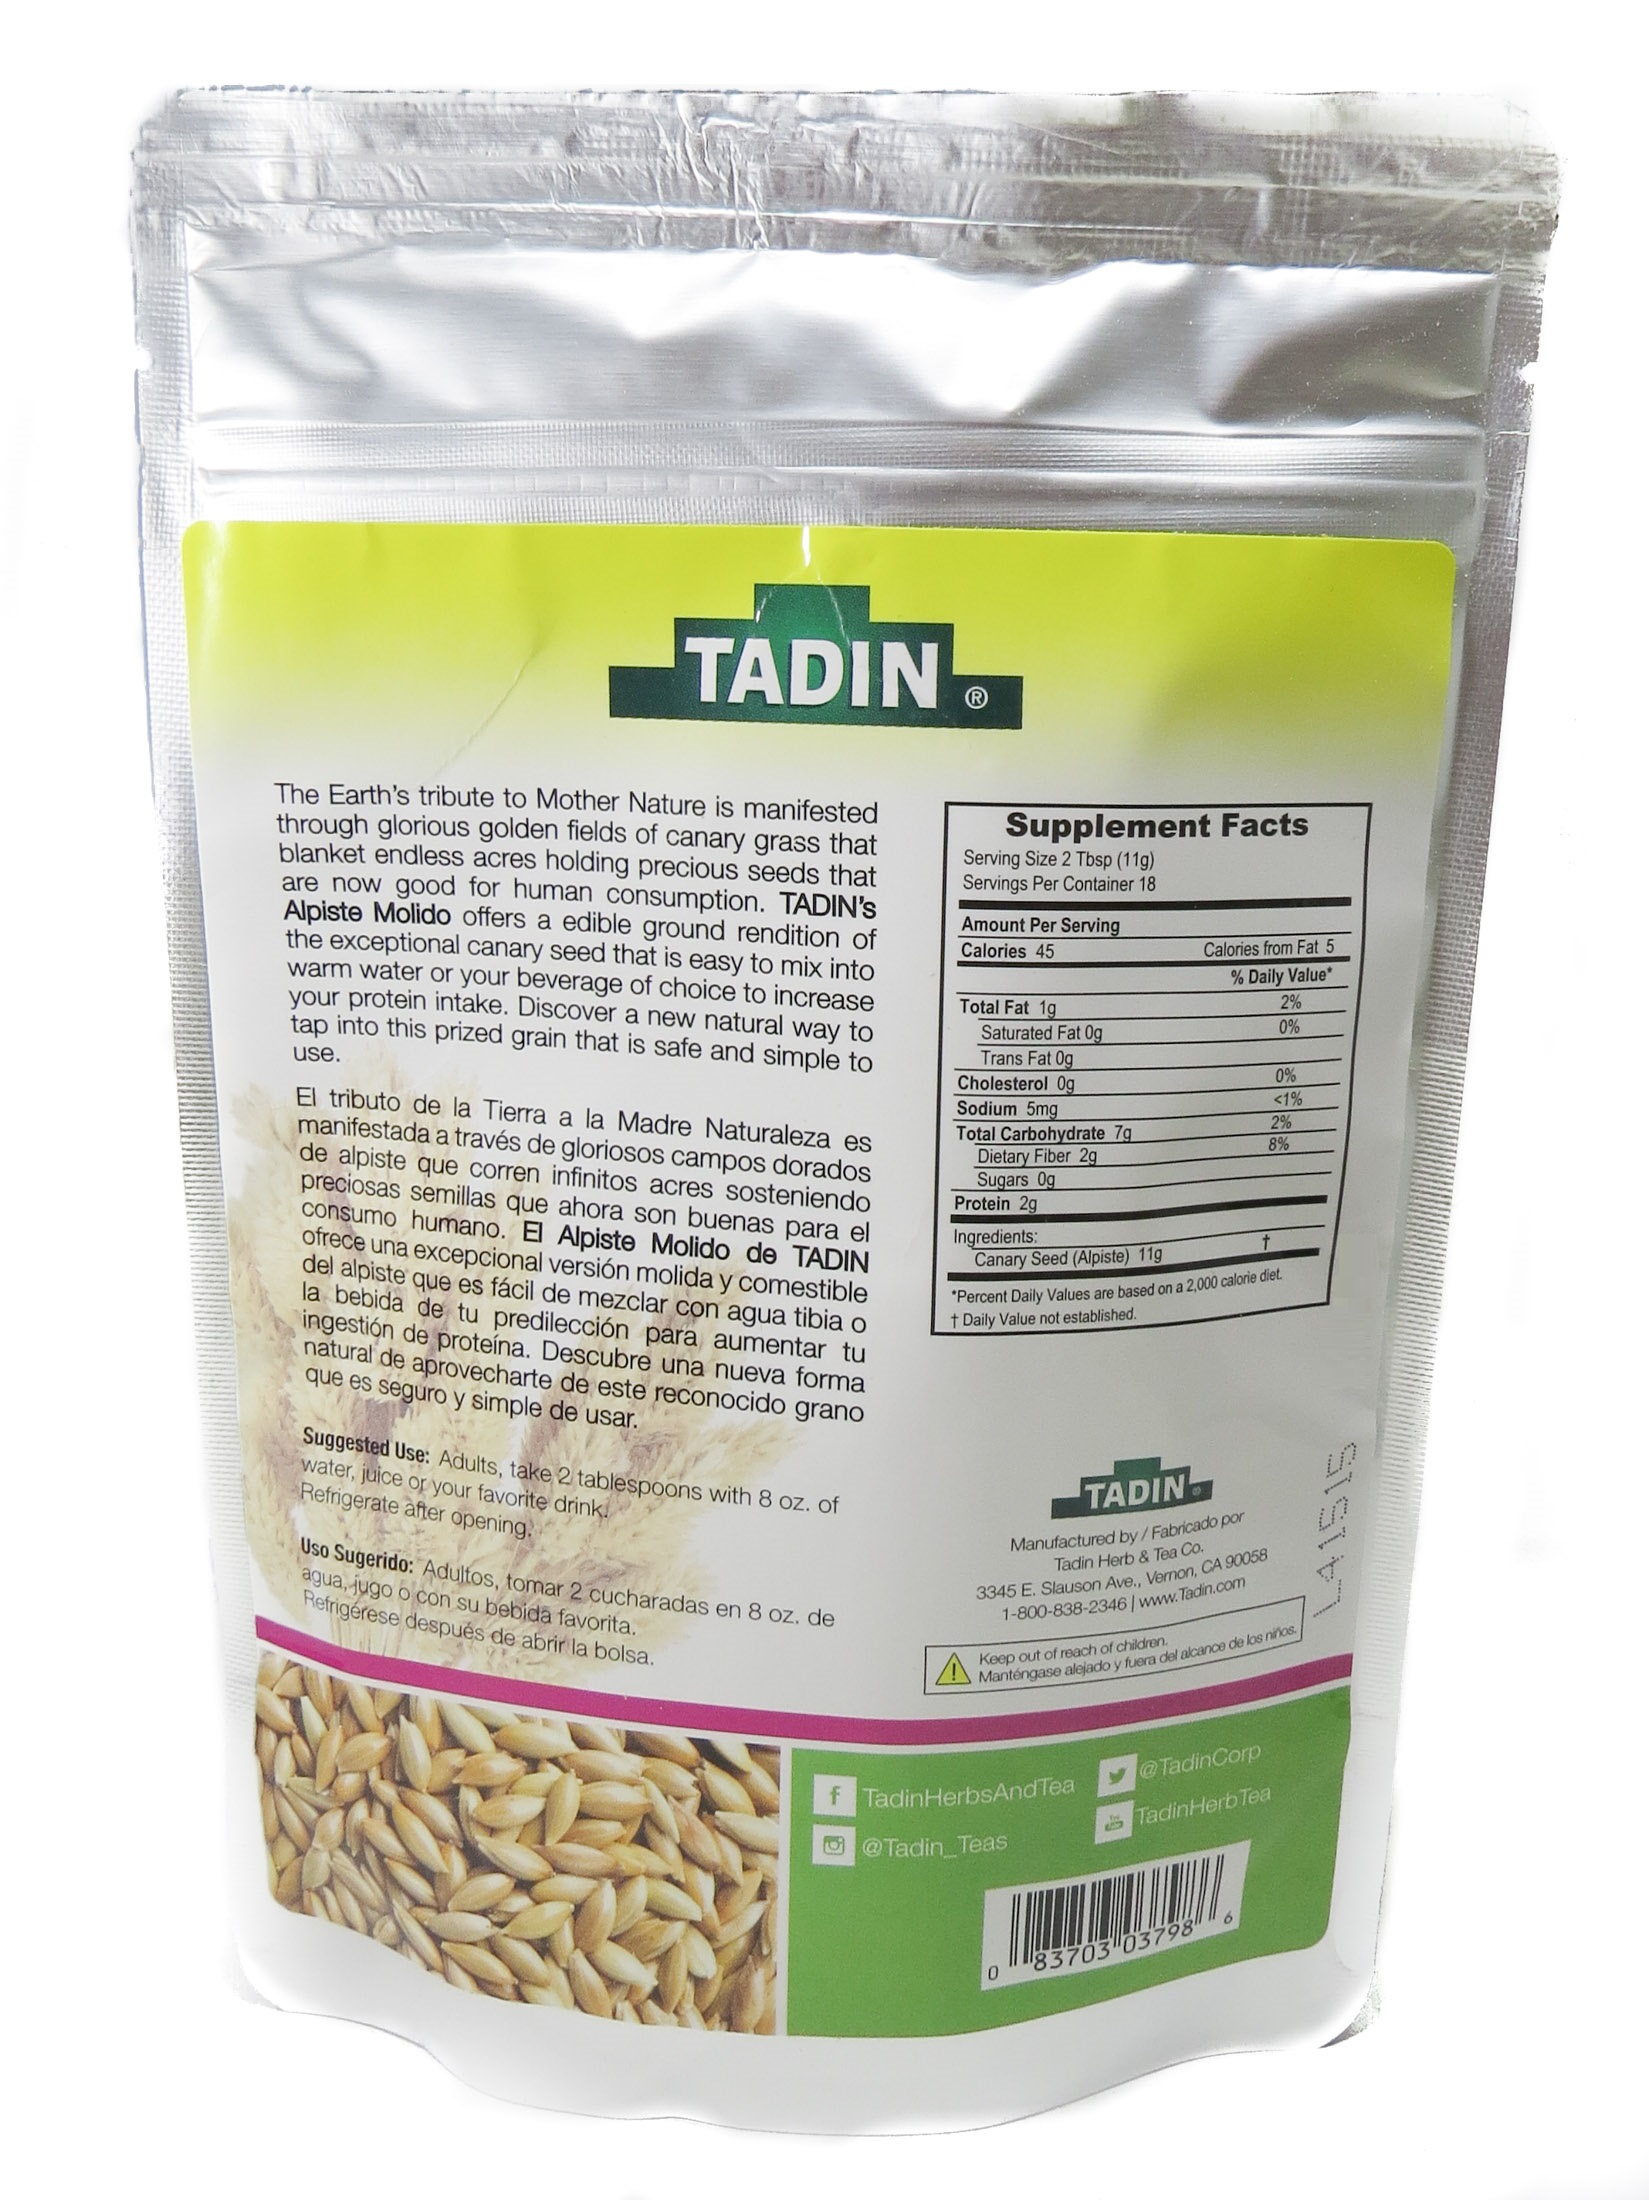 Tadin Ground Canary Seed Dietary Supplement 7 Oz / Alpiste Molido - image 2 of 2